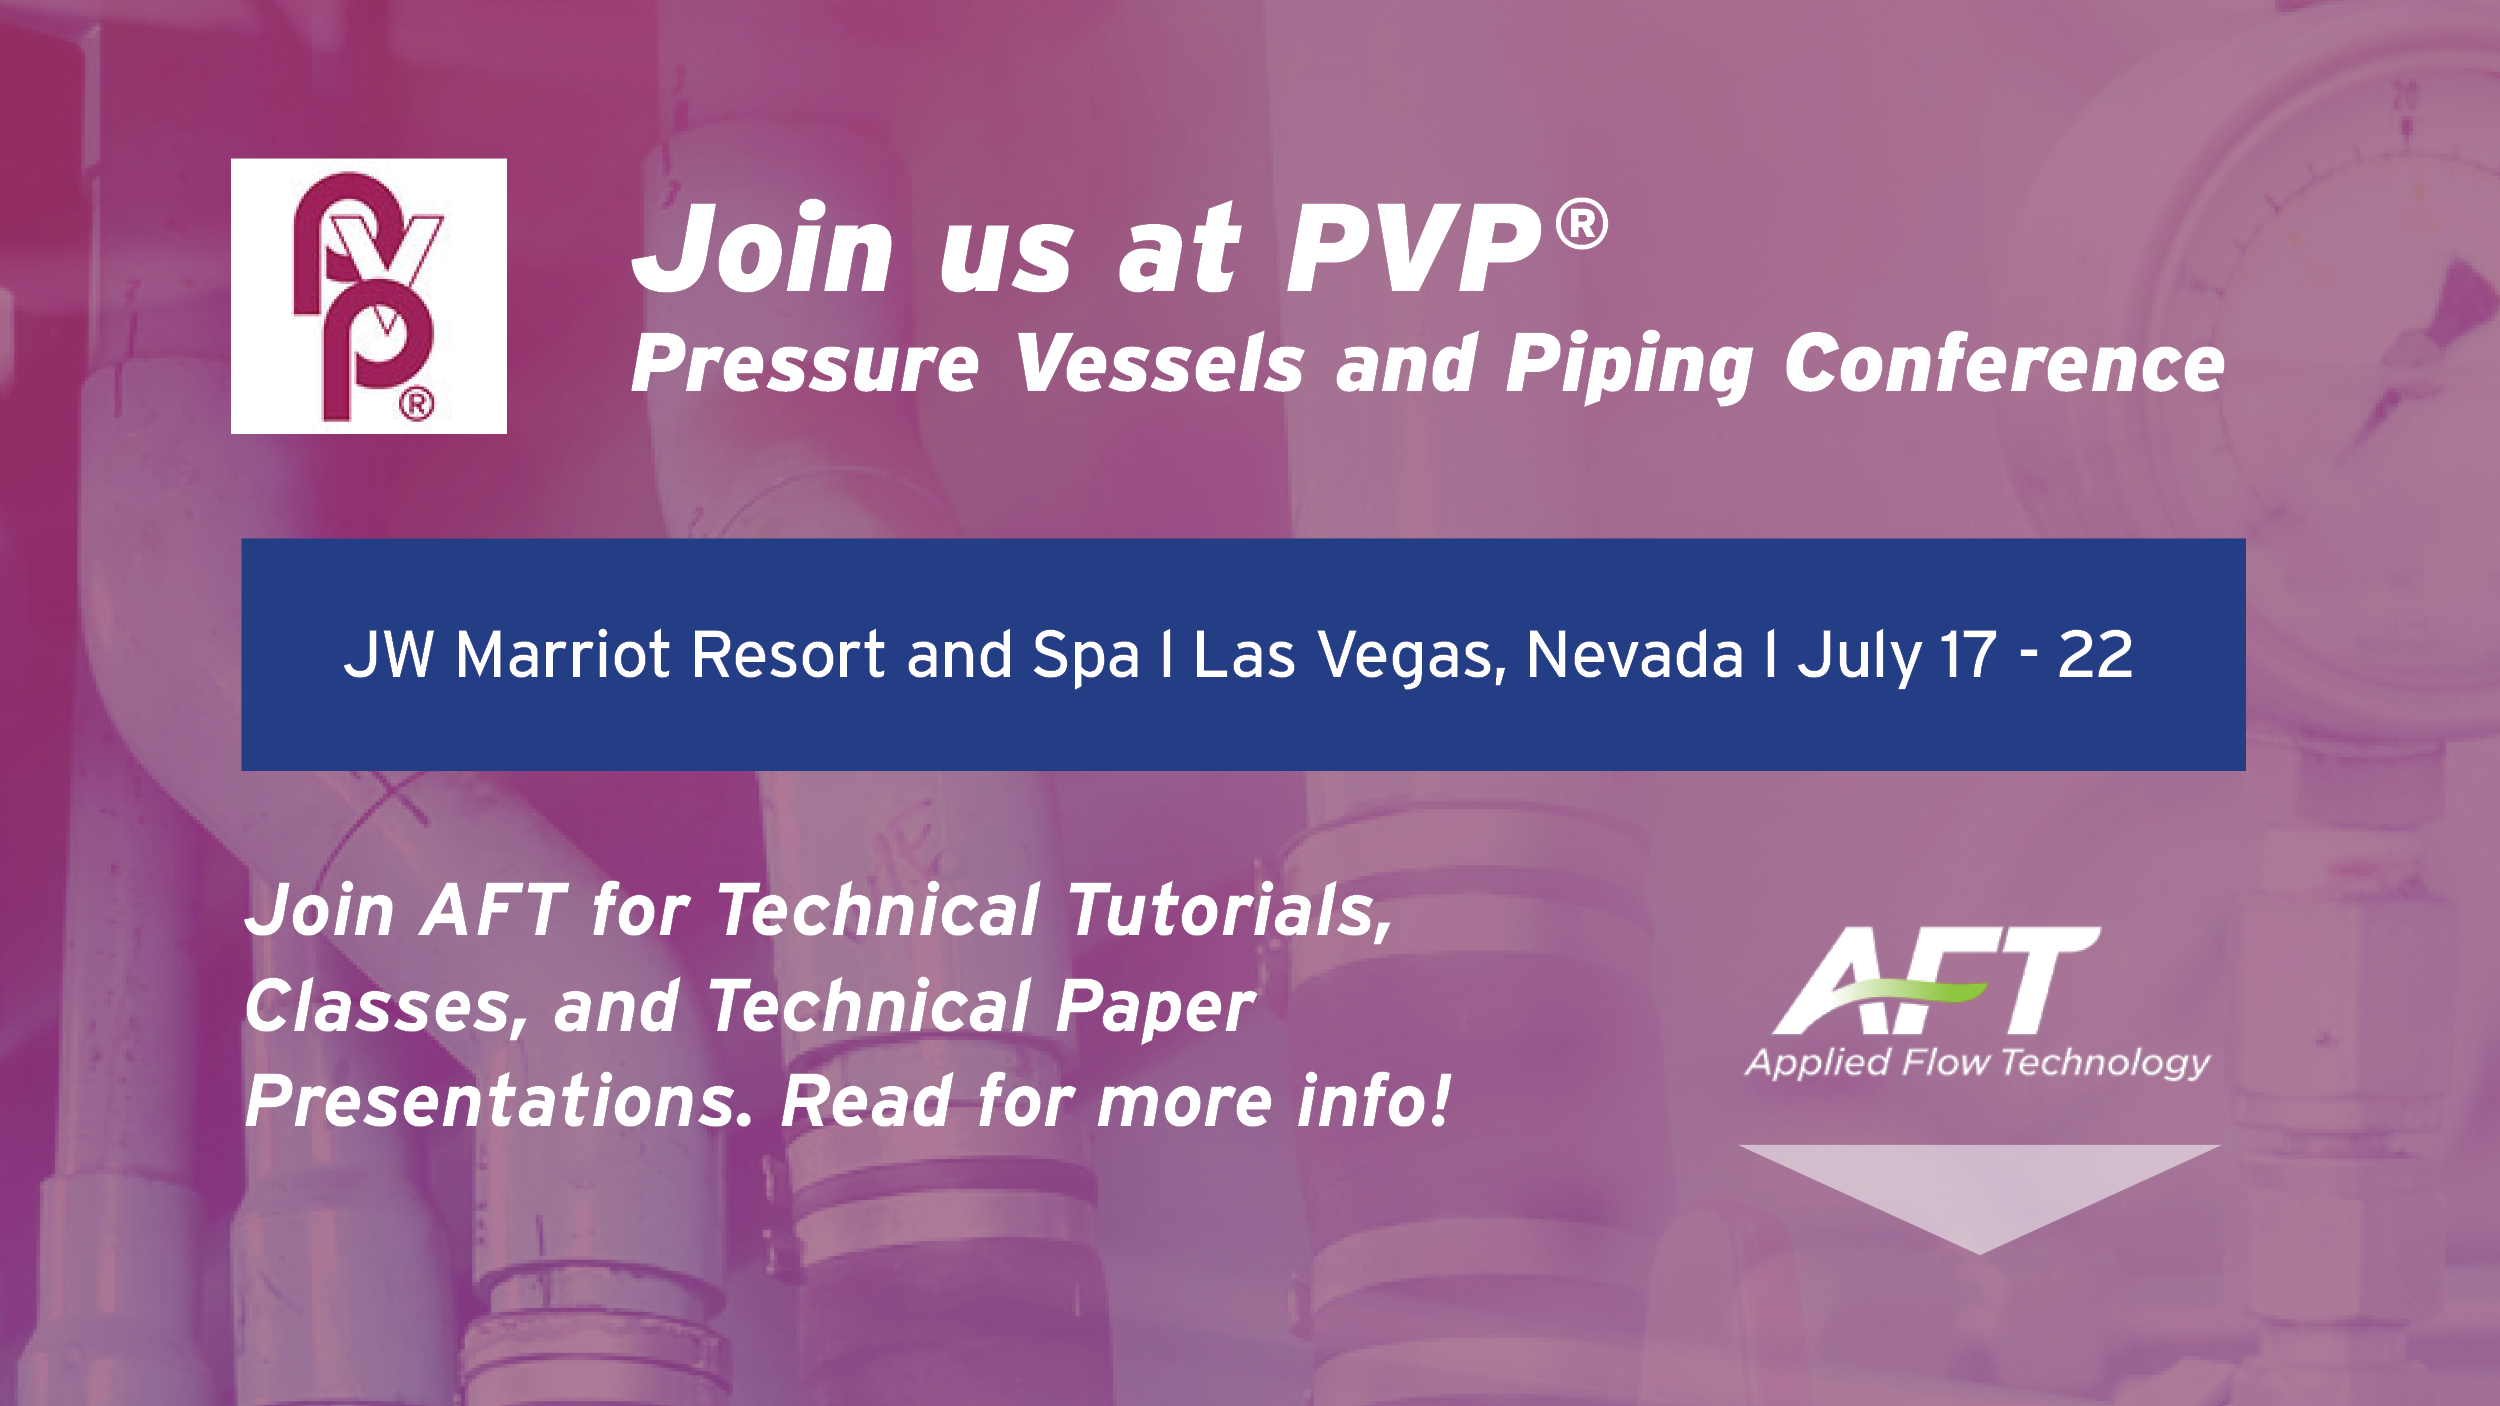 ASME PVP Pressure Vessels & Piping Conference